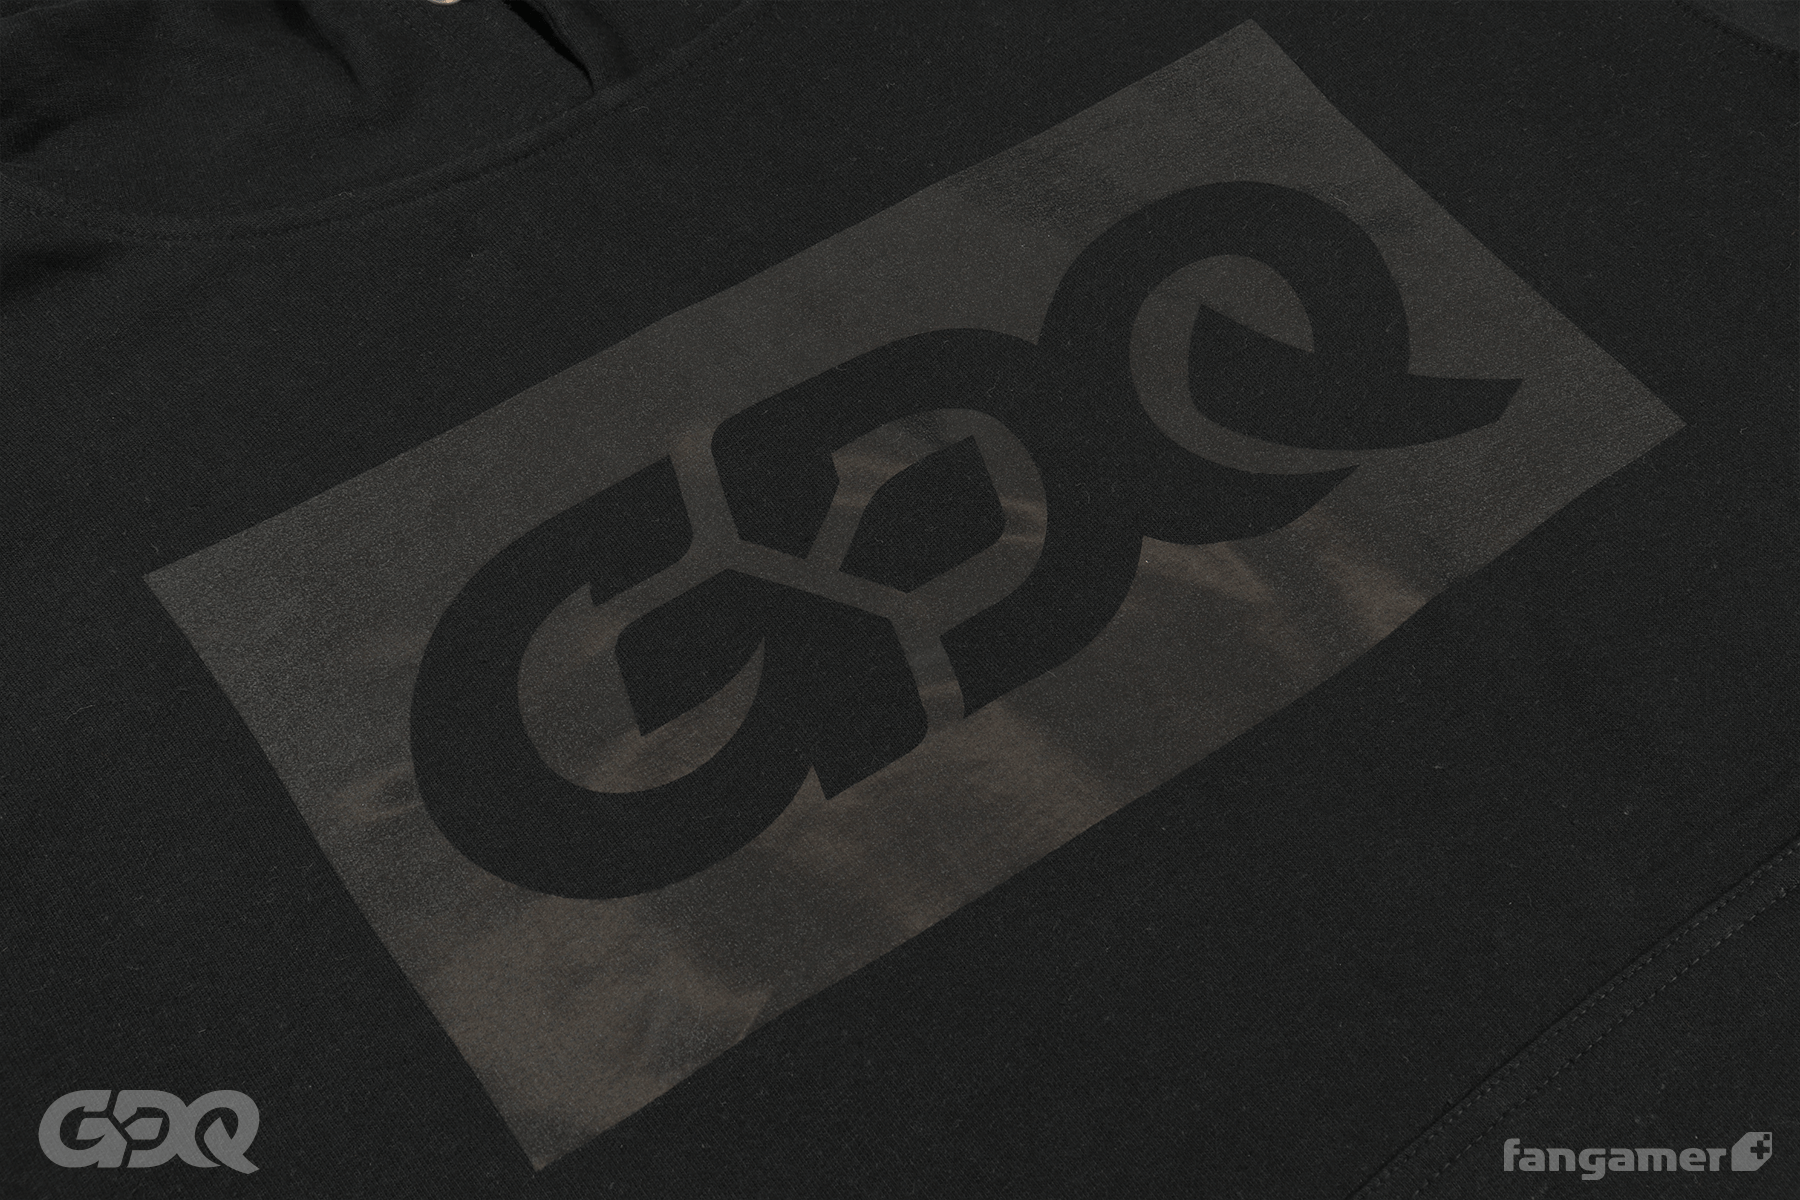 GDQ Blindfolded Hoodie - Fangamer